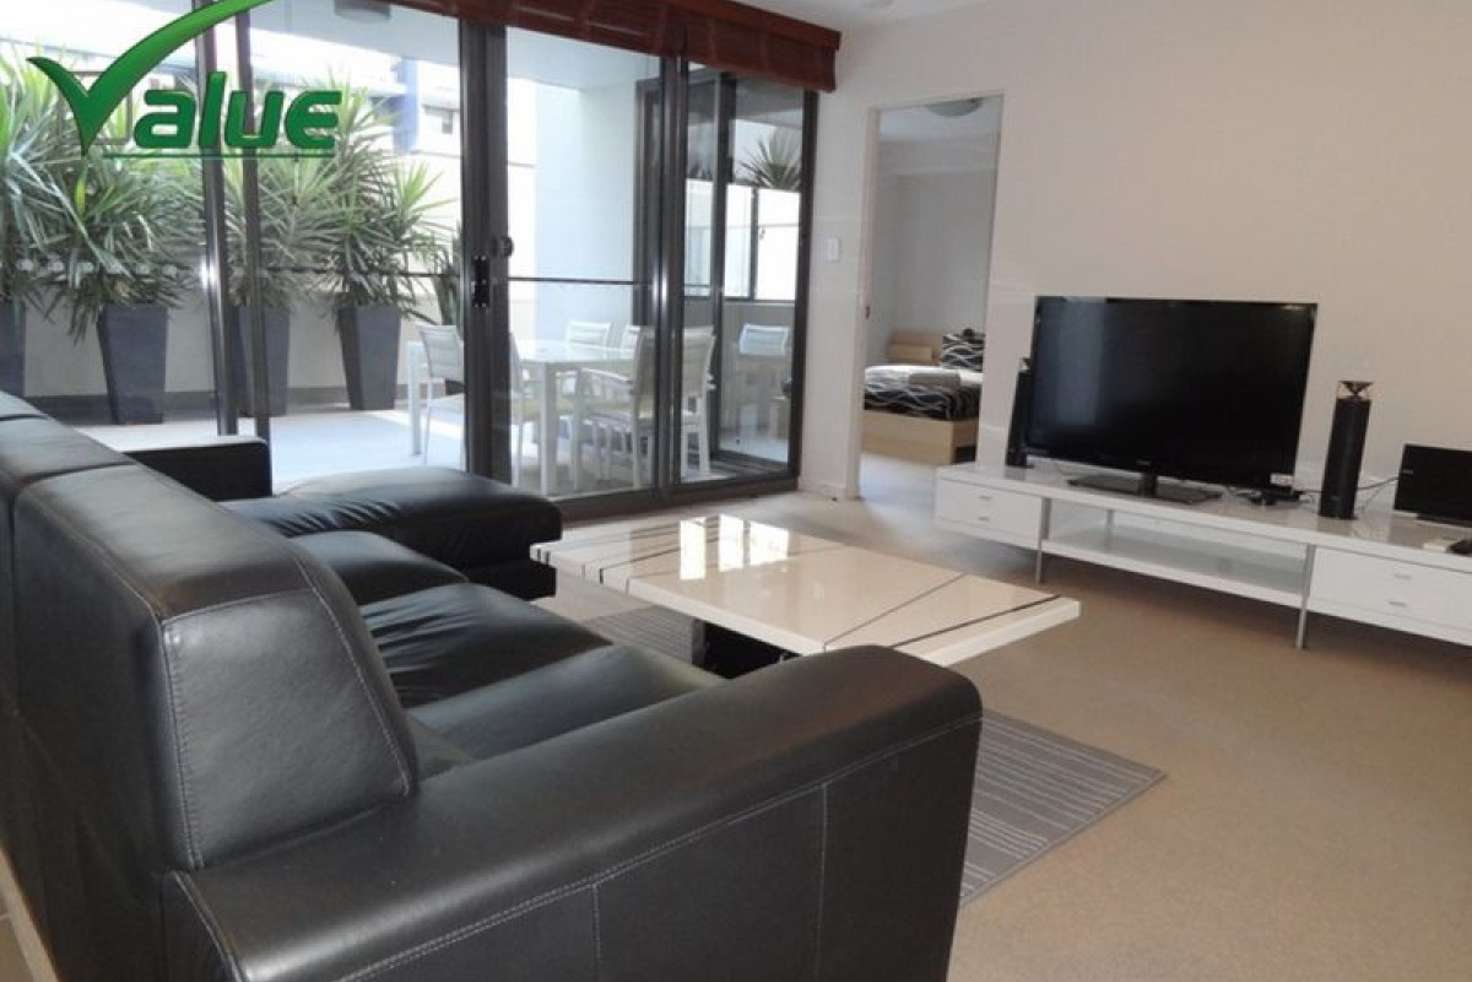 Main view of Homely apartment listing, 5/118 Adelaide Terrace, East Perth WA 6004